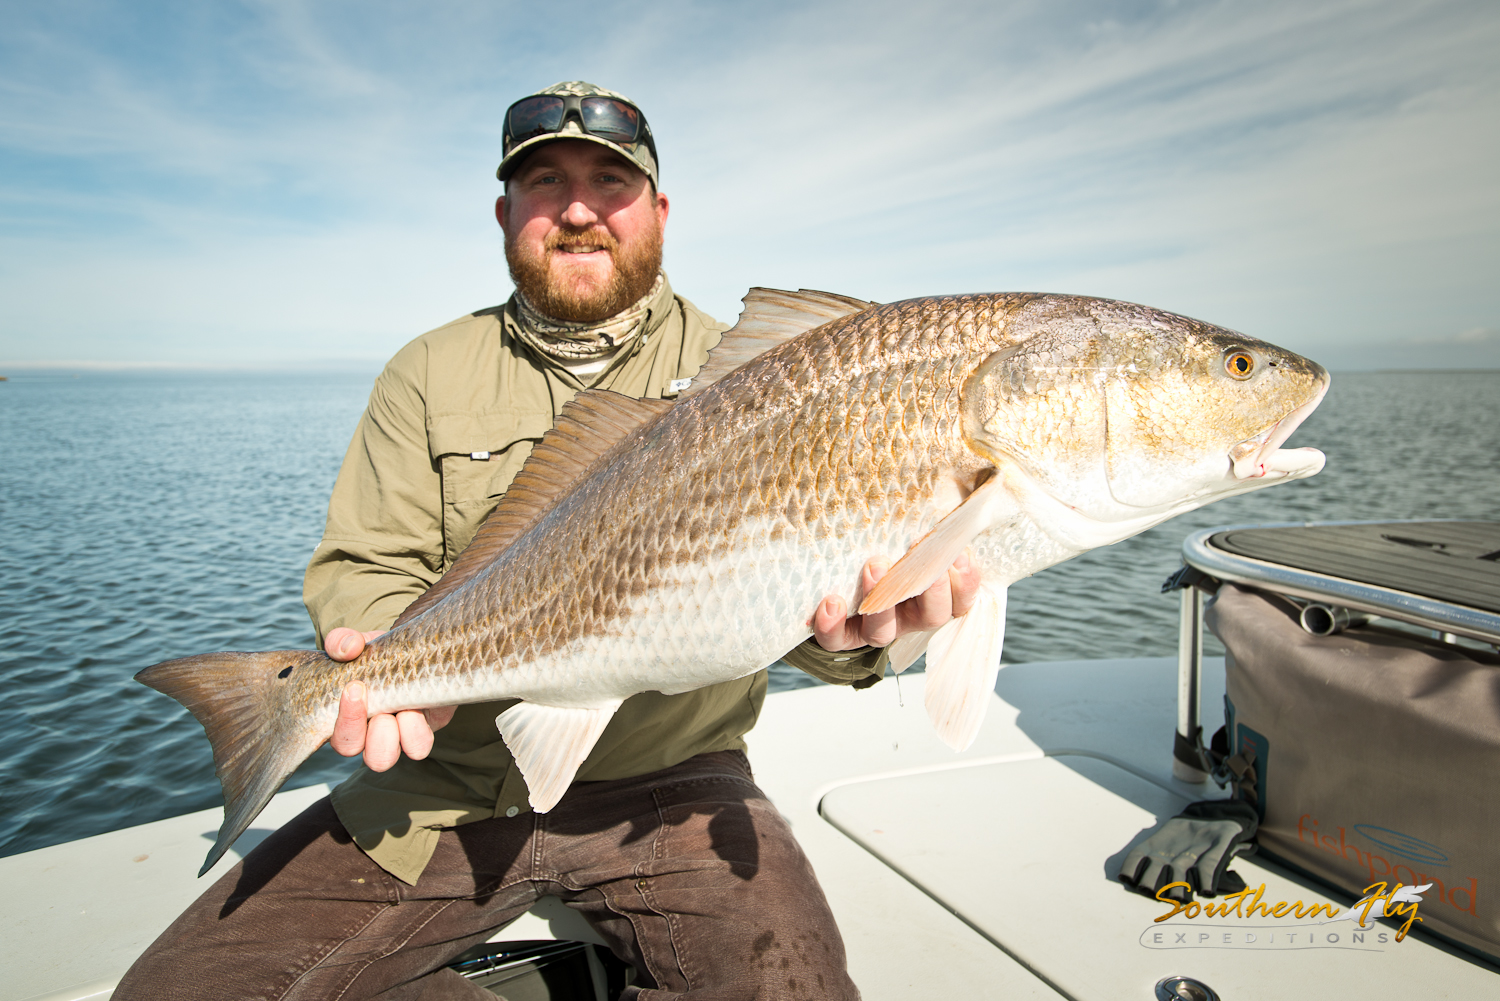 Best fishing guides in Louisiana - Southern Fly Expeditions of New Orleans 